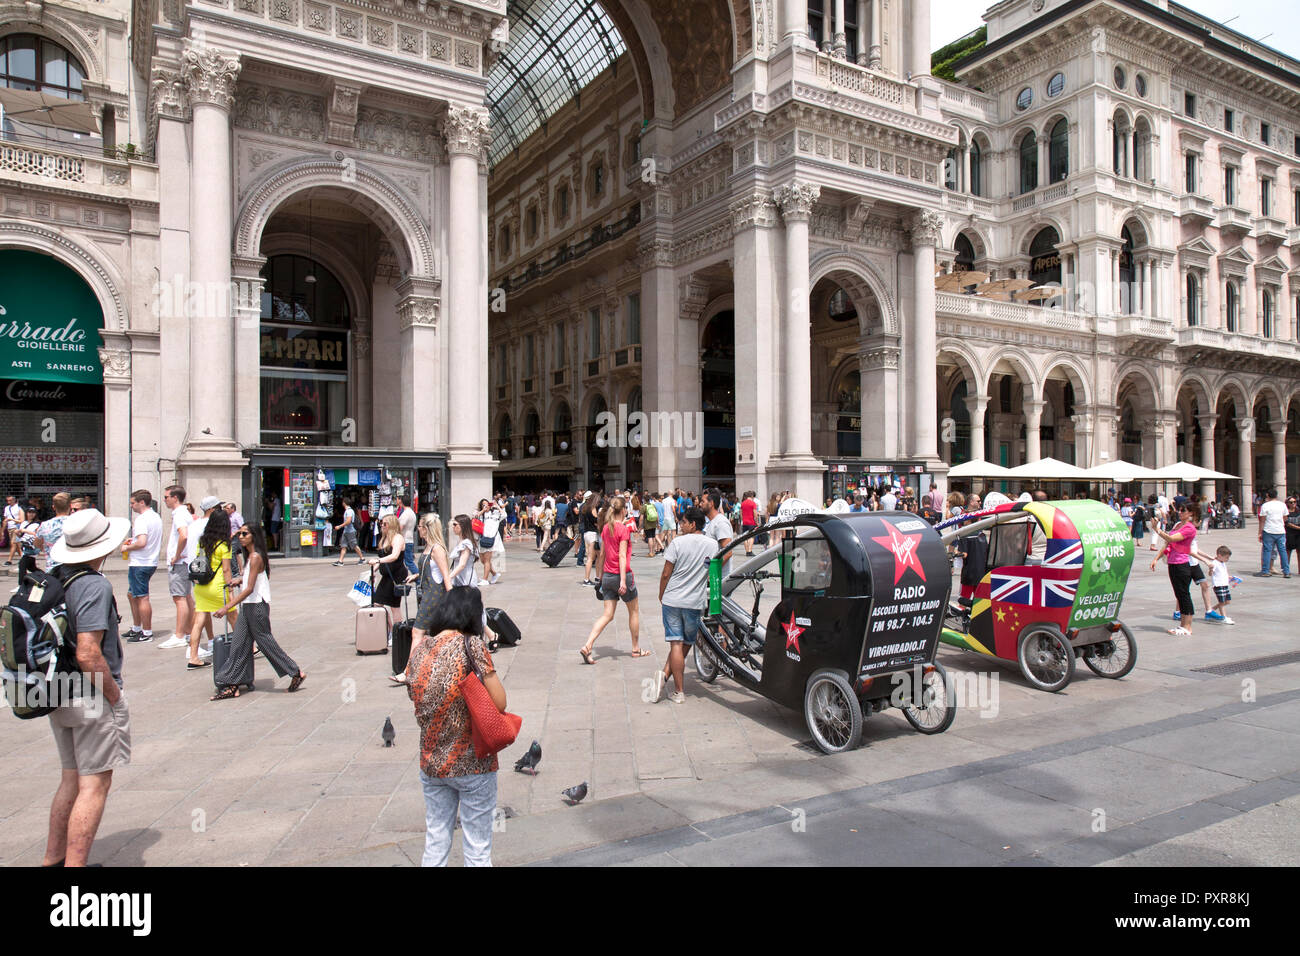 Crowd of people on the Piazza Duomo at its conjunction with Galleria Vittorio Emanuelle II. Note pedicabs. Stock Photo